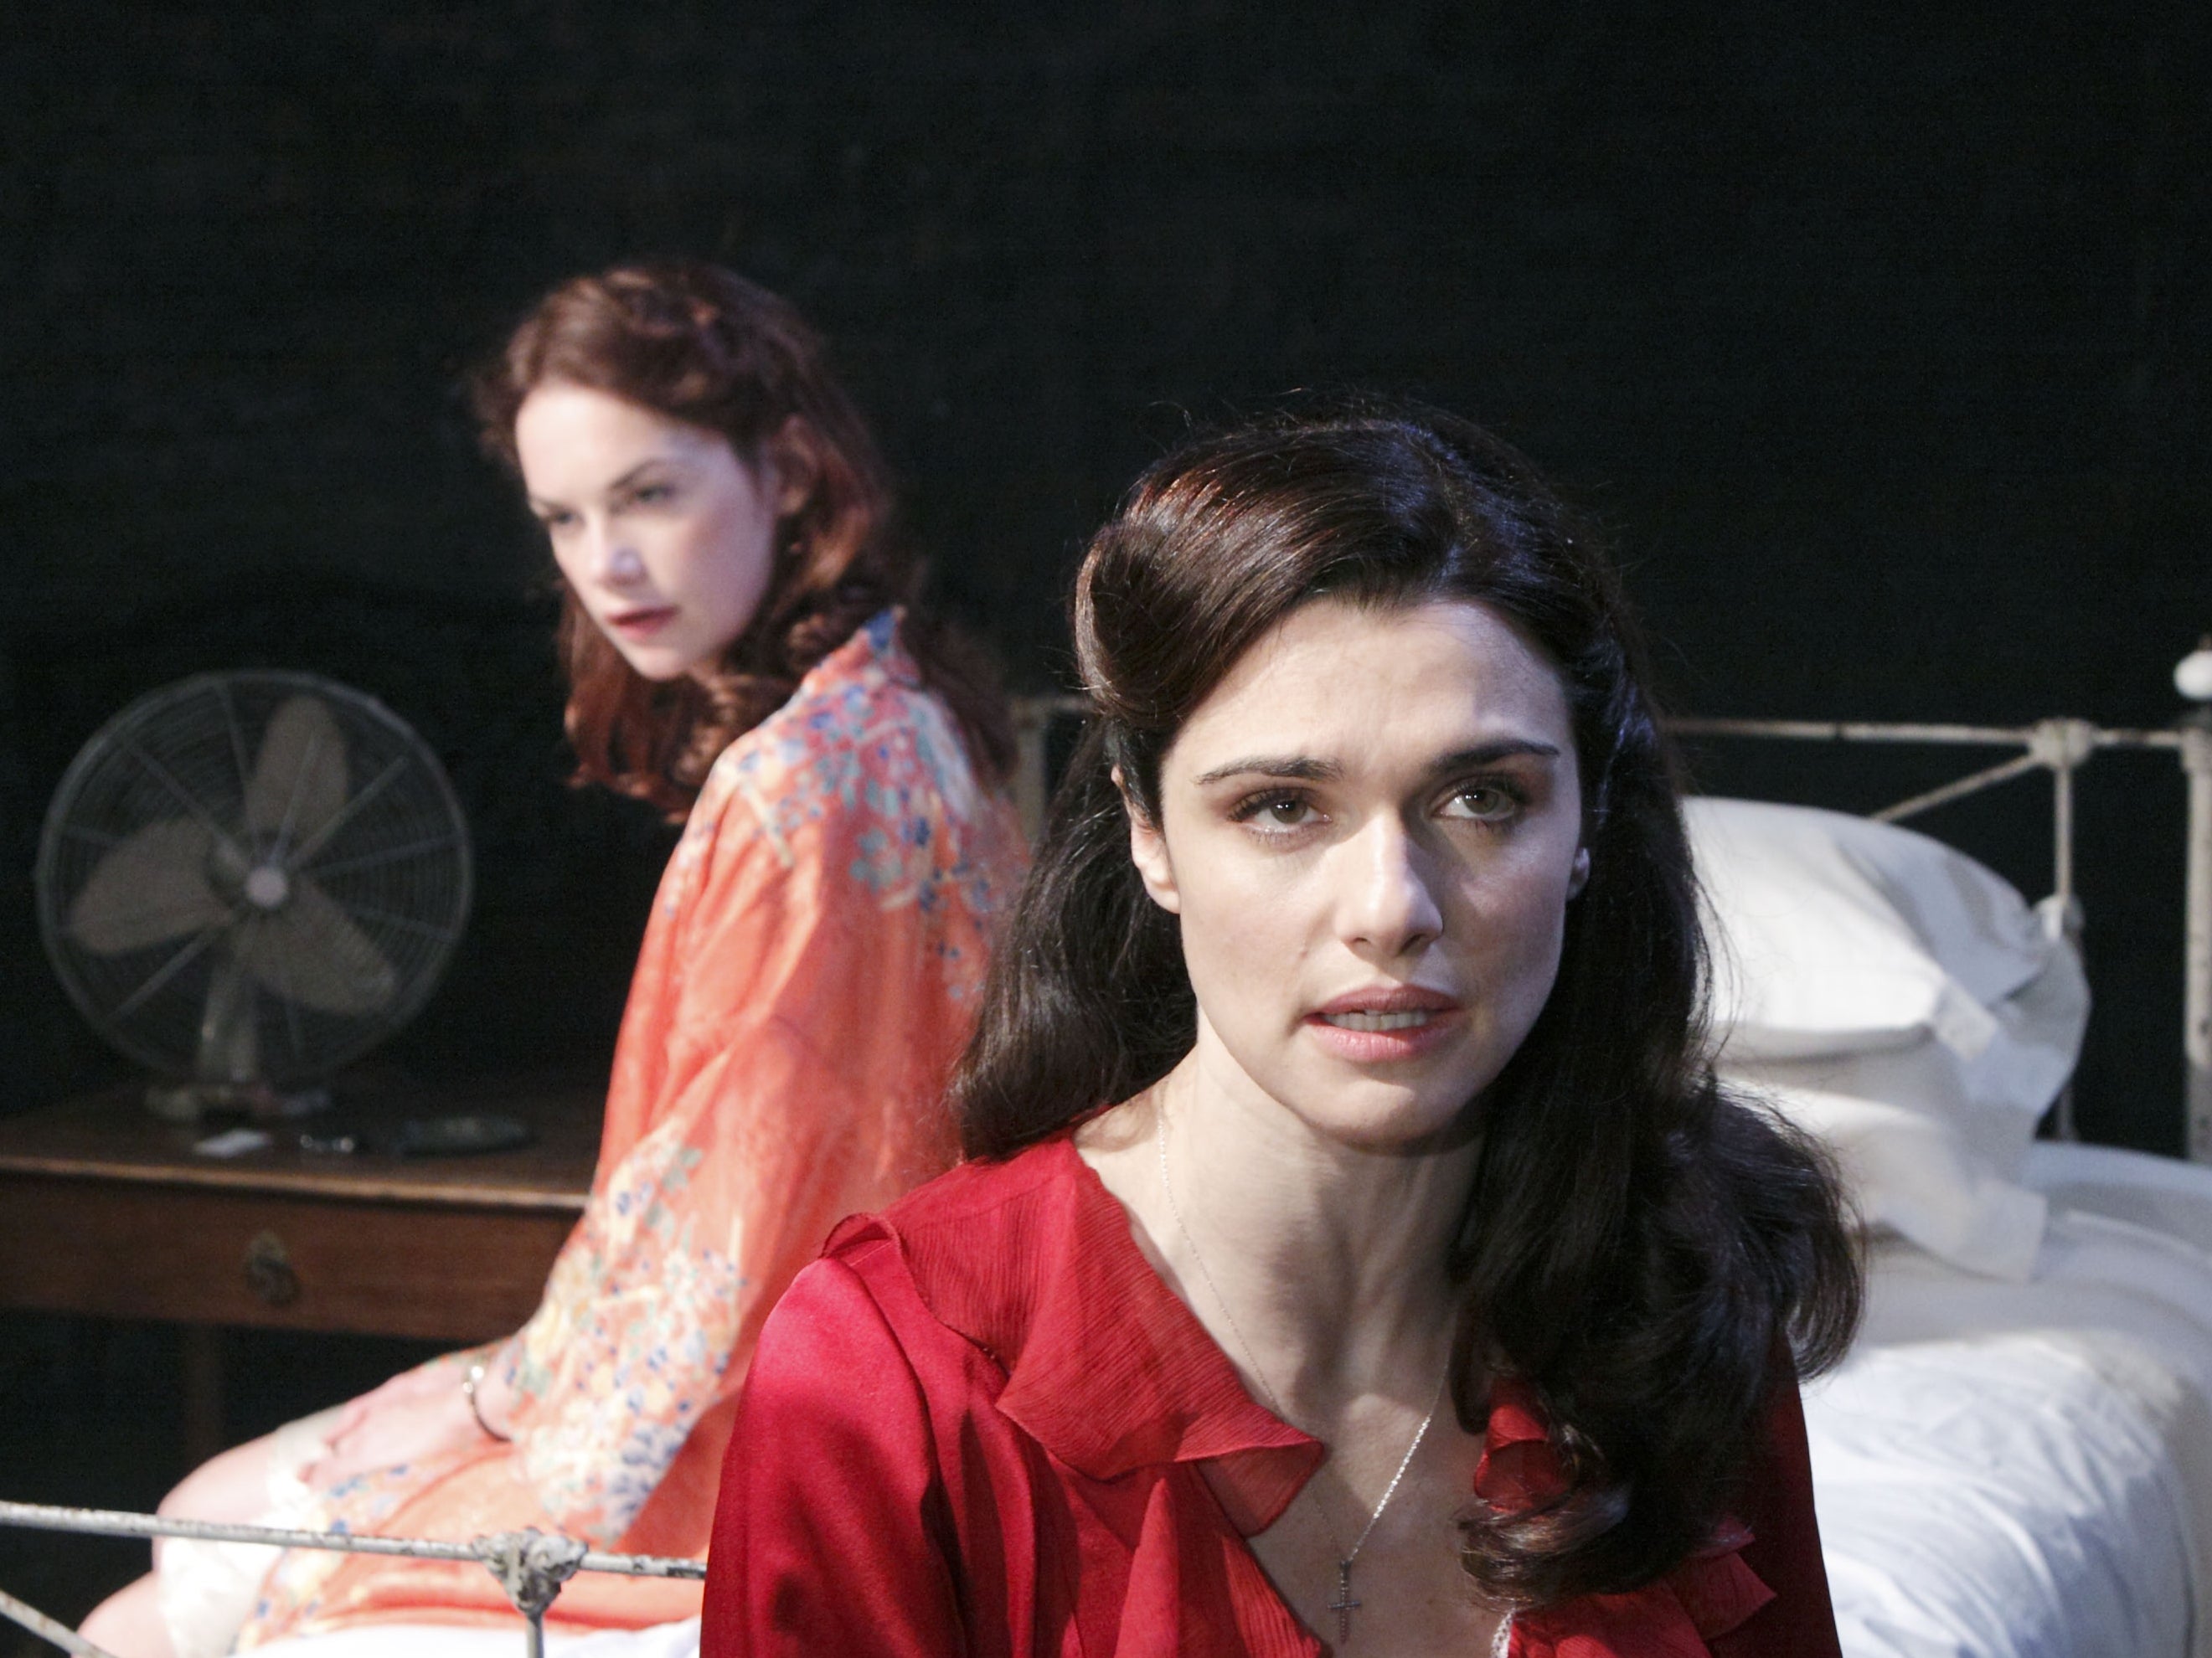 Ruth Wilson and Rachel Weisz in the Donmar Warehouse production of ‘A Streetcar Named Desire’ in 2009